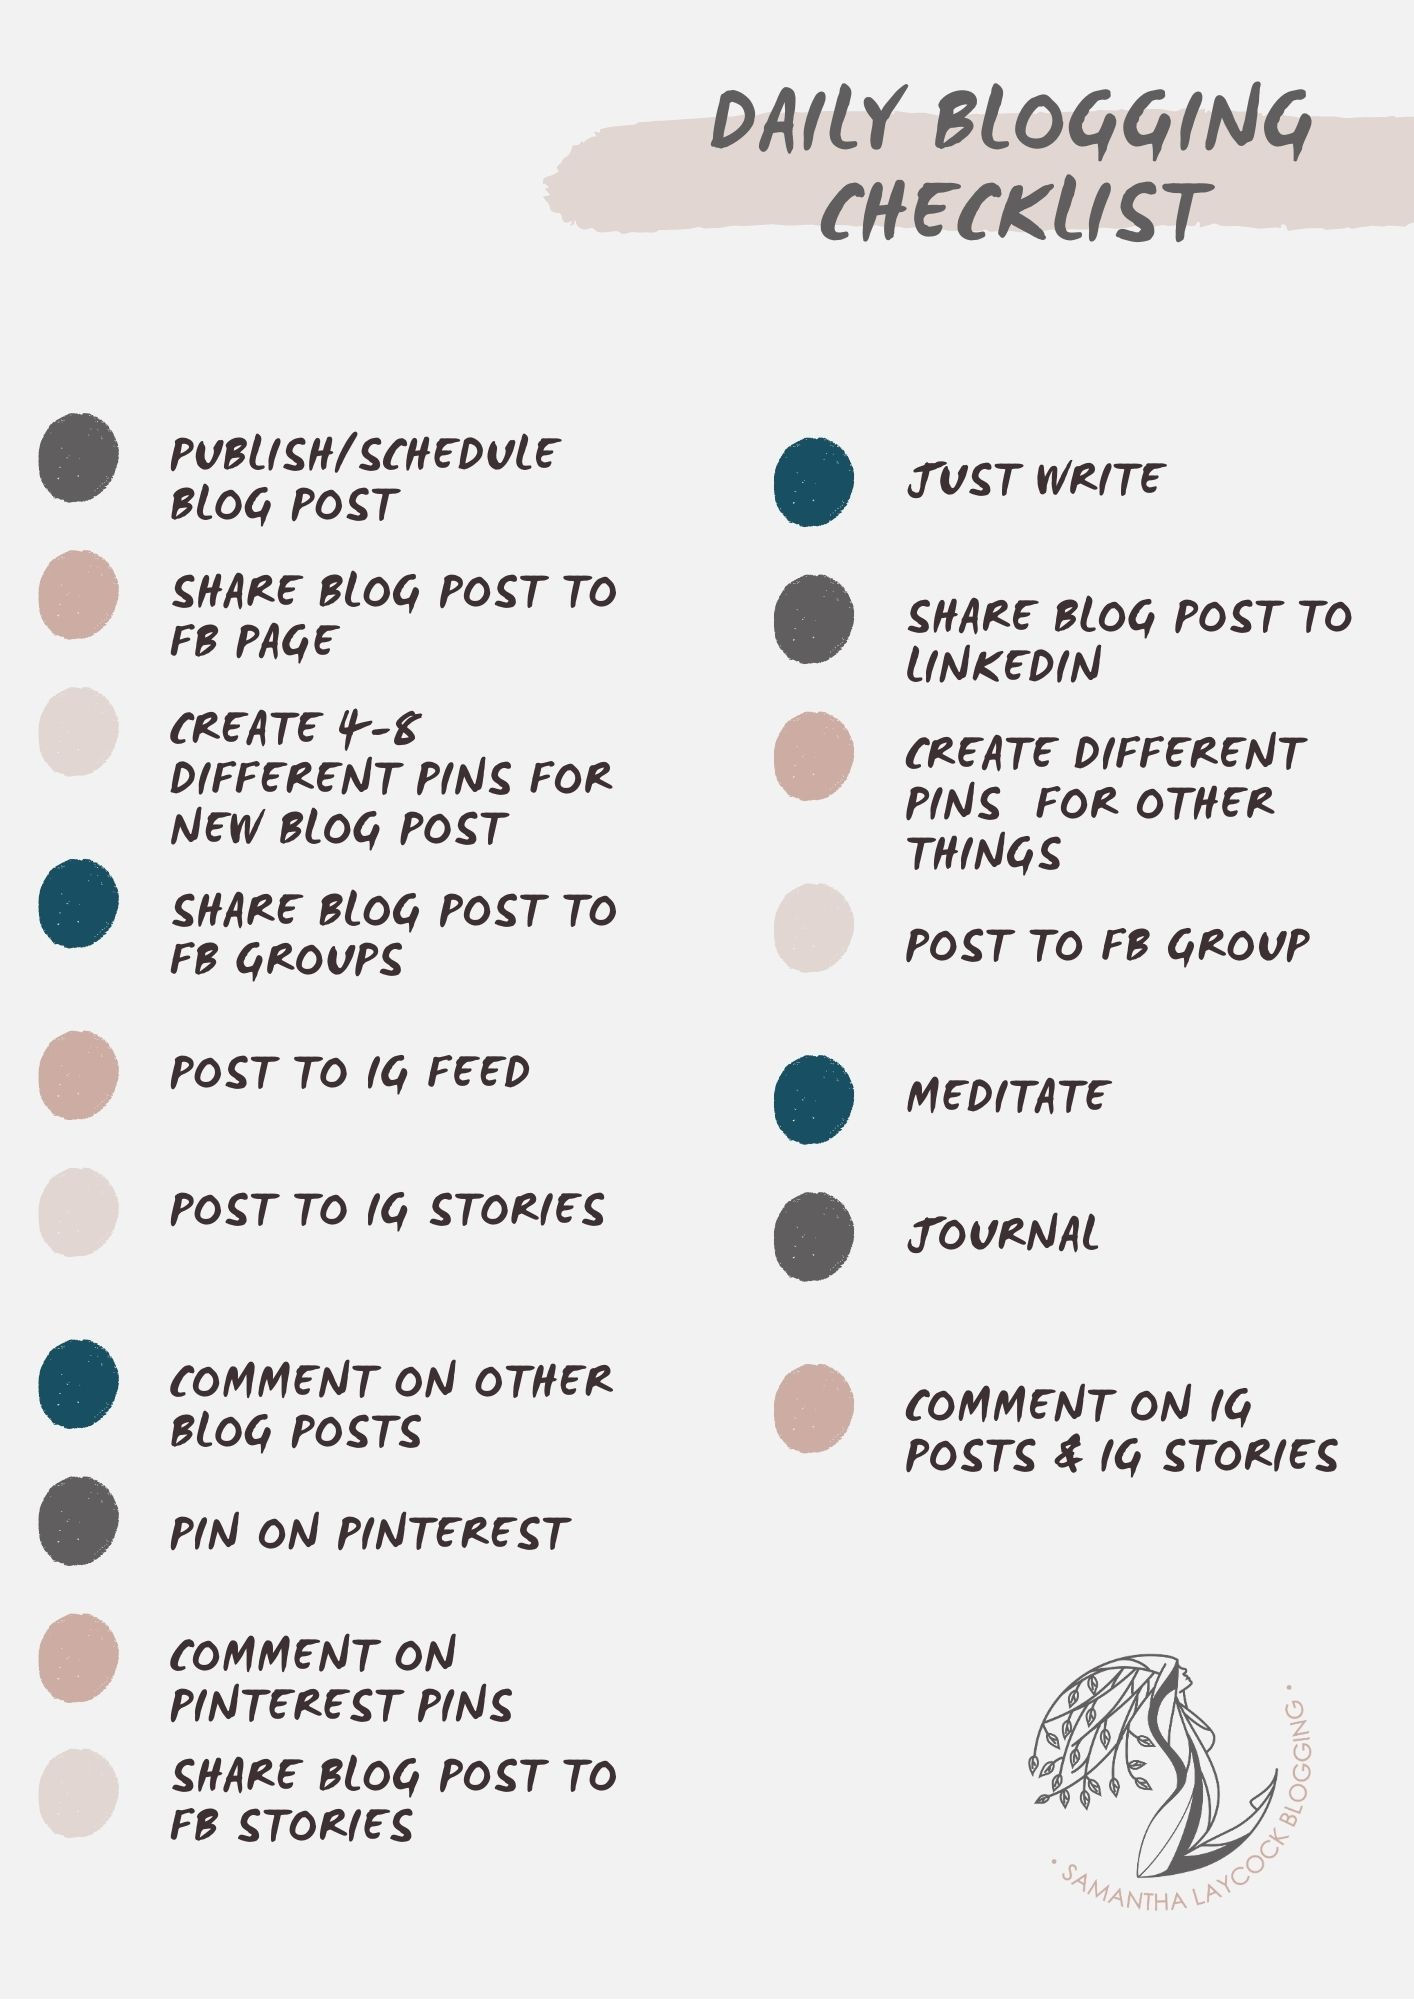 Your daily blogging checklist